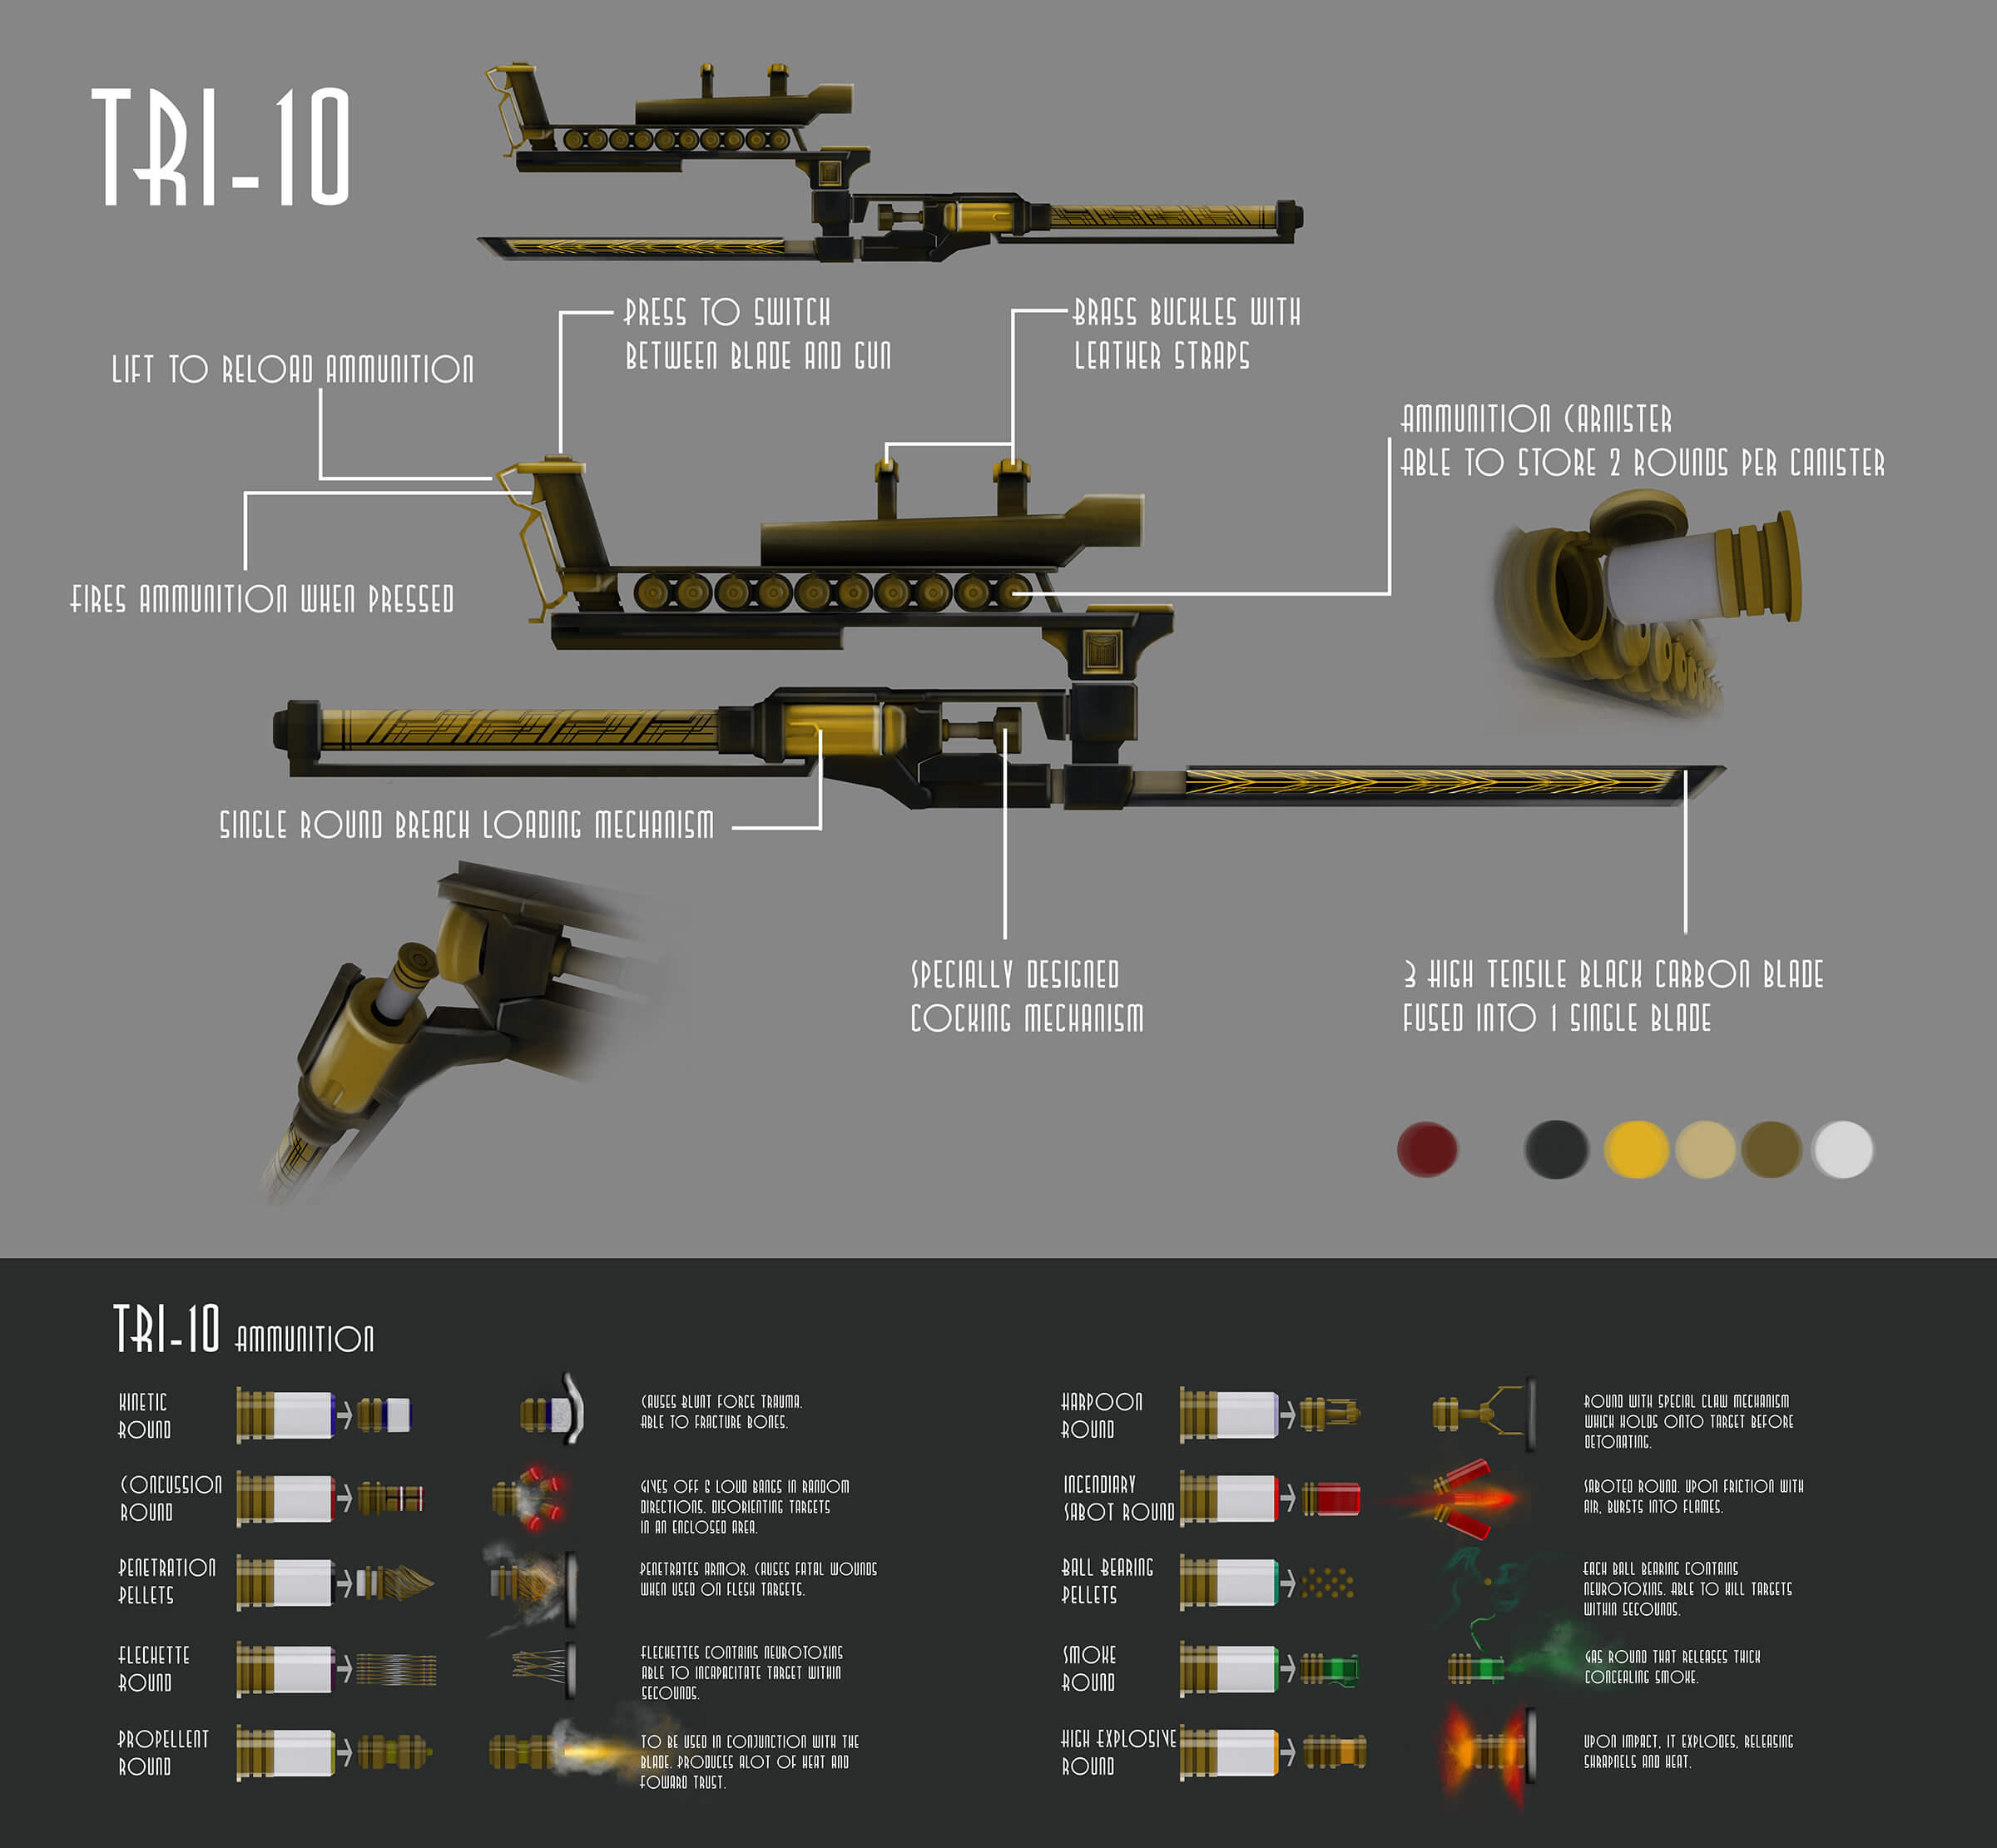 A gold-and-black-adorned, arm-held weapon with a blade, concealed gun barrel, and description of its various ammunition.